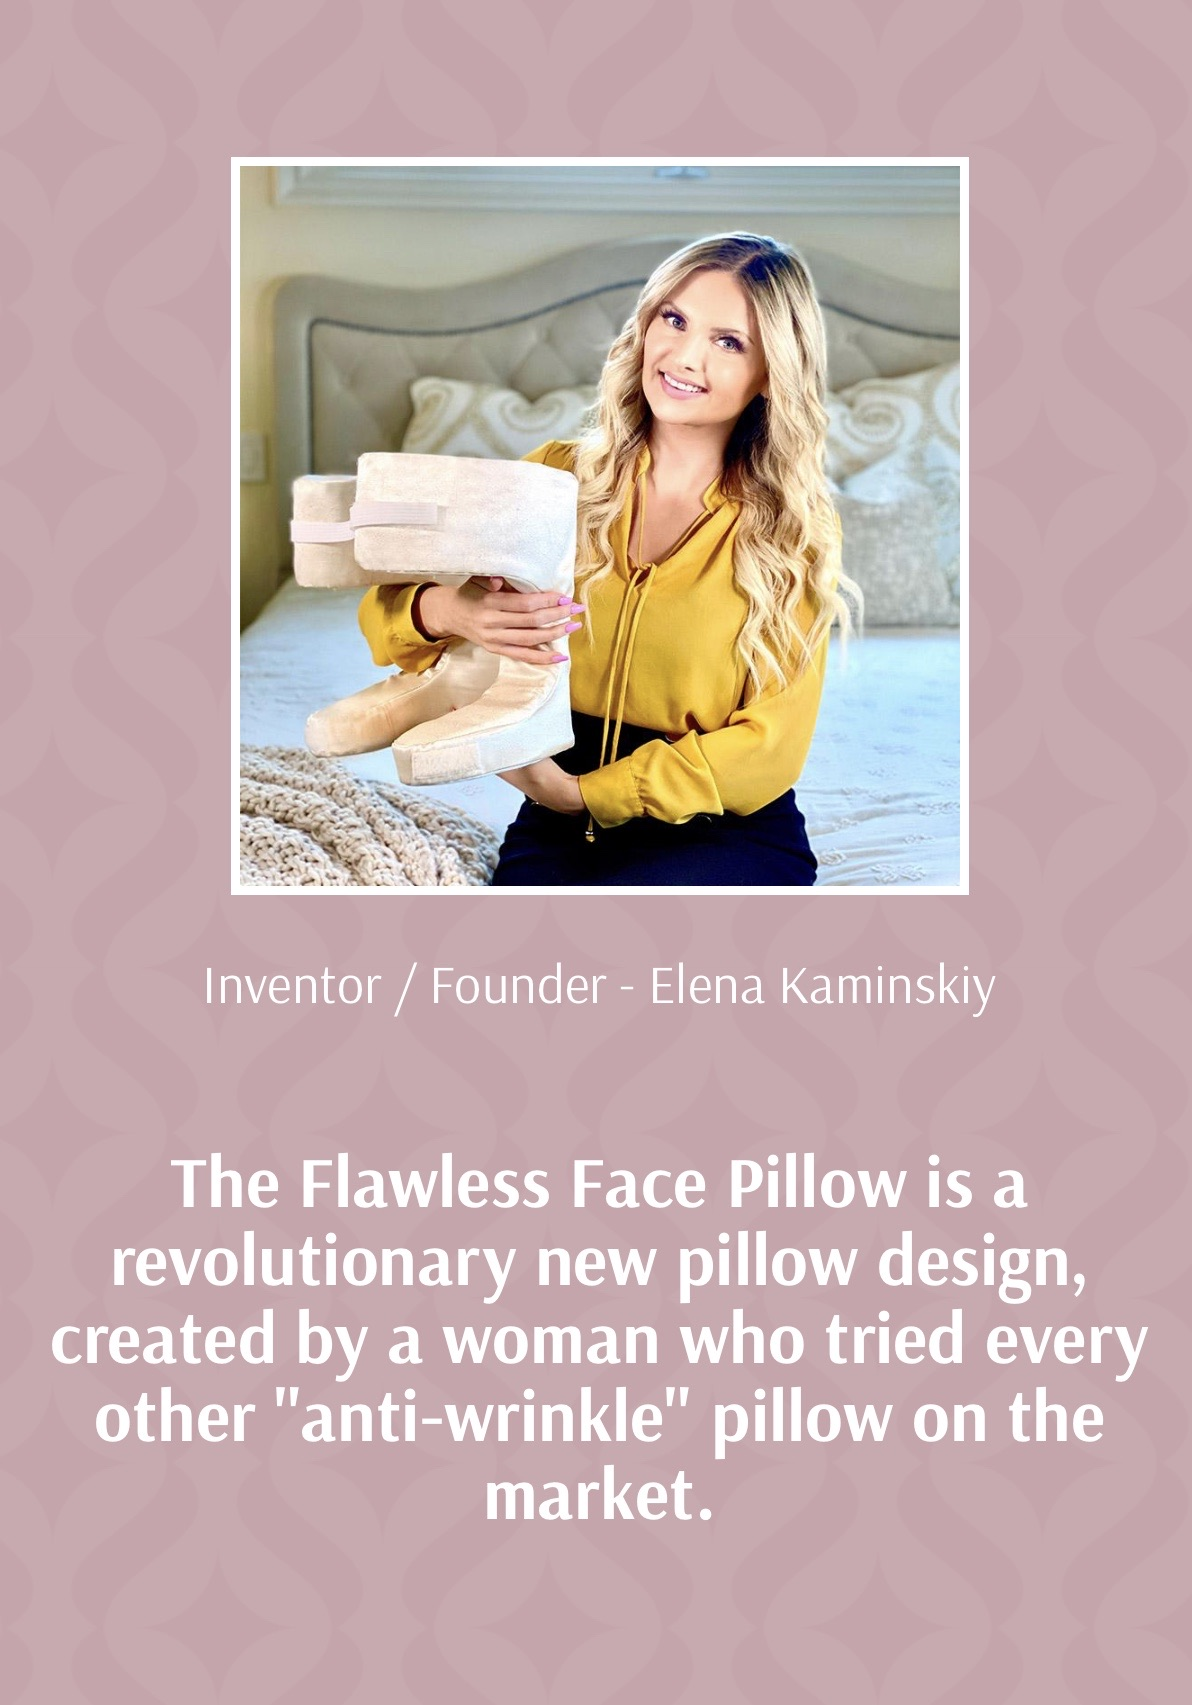 The Flawless Face Pillow Slated to Revolutionize the Anti-Wrinkle